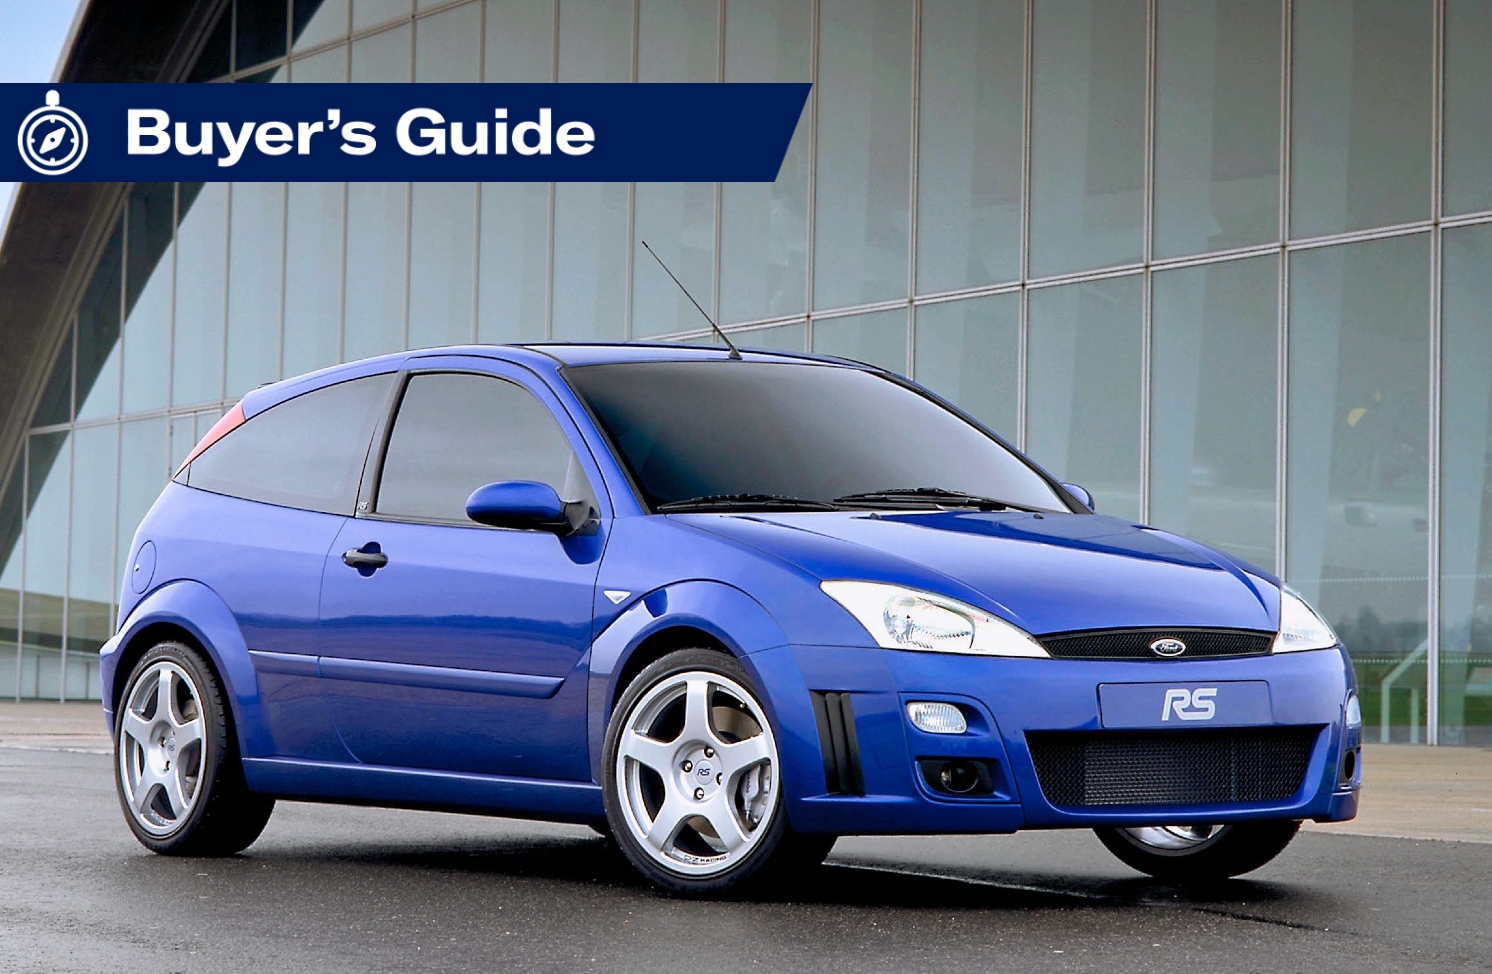 Ford Focus Mk1 buyer's guide - Classics World